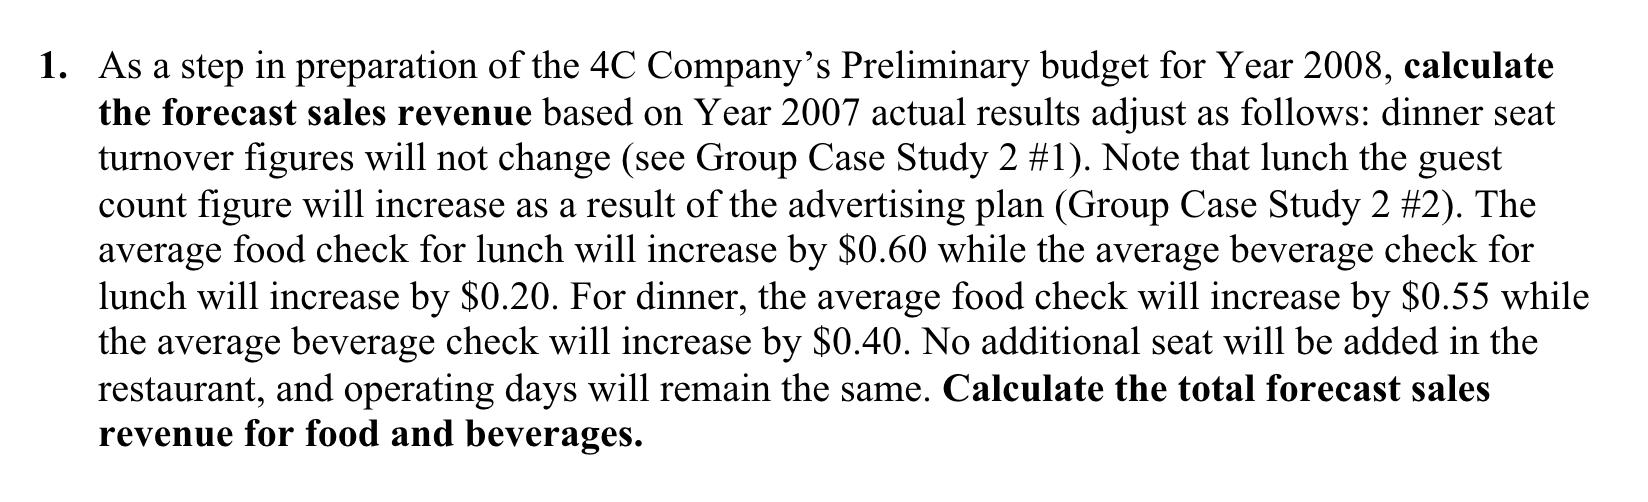 1. As a step in preparation of the 4C Companys Preliminary budget for Year 2008, calculate the forecast sales revenue based